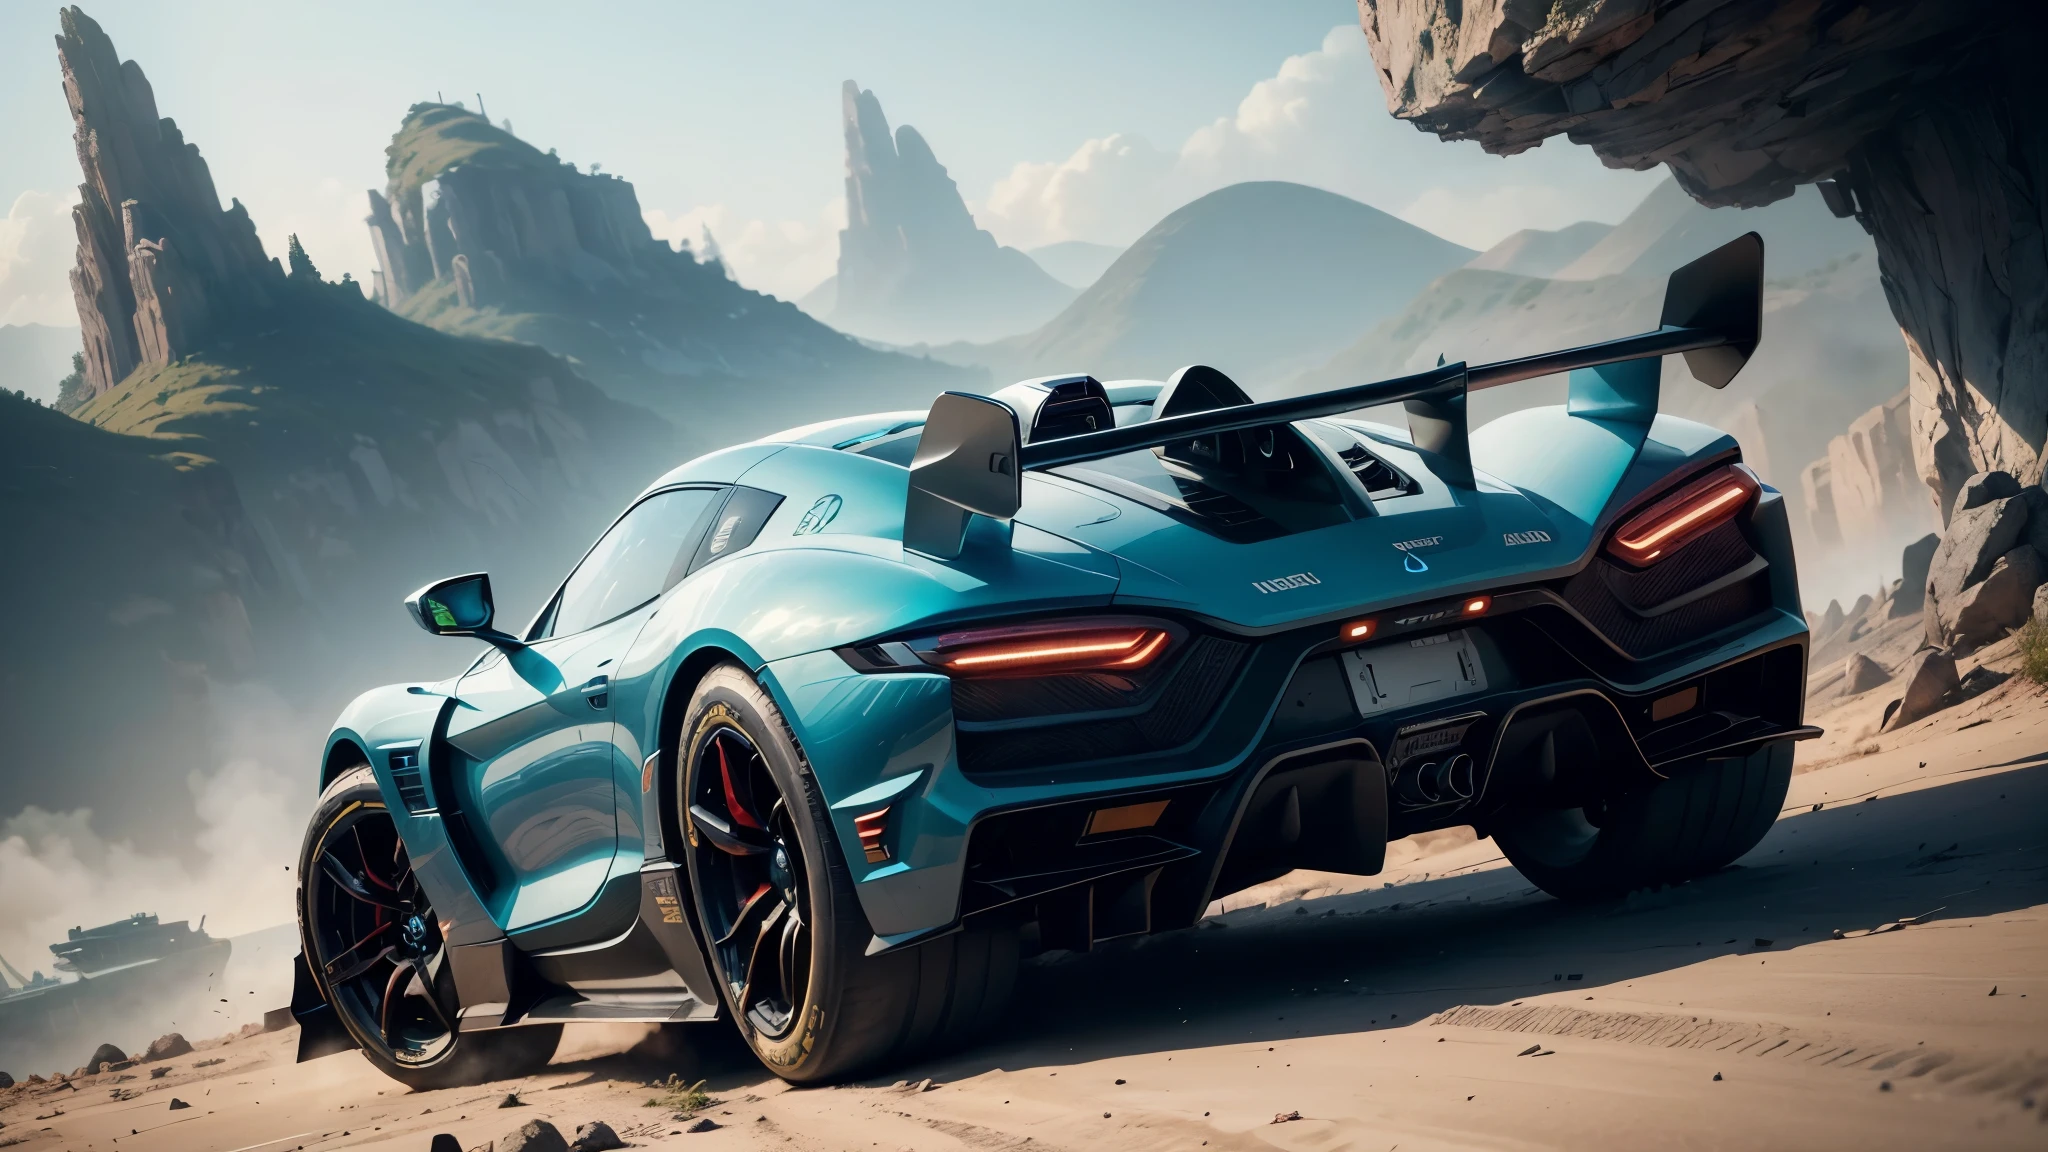 ((masterpiece)), (((best quality))), ((ultra-detailed)),  (masterpiece, photorealistic:1.3), exhilarating car race on a distant alien planet, (unique alien terrain:1.2), (exotic plant life:1.1), (colorful alien flora:1.2), (strange rock formations:1.1), (futuristic race cars:1.2), (sleek aerodynamic designs:1.1), (high-tech racing suits:1.1), (dynamic action shots:1.2), (intense speed:1.2), (alien sky with multiple moons:1.1), (fantastic alien landscapes:1.2), (vibrant alien atmosphere:1.1), (spectacular futuristic cityscape in the distance:1.2), (advanced technology:1.1), (thrilling competition:1.2), (alien spectators:1.1), (mind-blowing race track design:1.2), (immersive sound effects:1.1), (detailed vehicle textures:1.2), (captivating camera angles:1.1), (epic intergalactic setting:1.2), award winning photo, BLN-L24, Exposure,High Contrast,Low Saturation,High Saturation 8k 3D, F 2.8 lens, Aerial View, Cinematic lighting